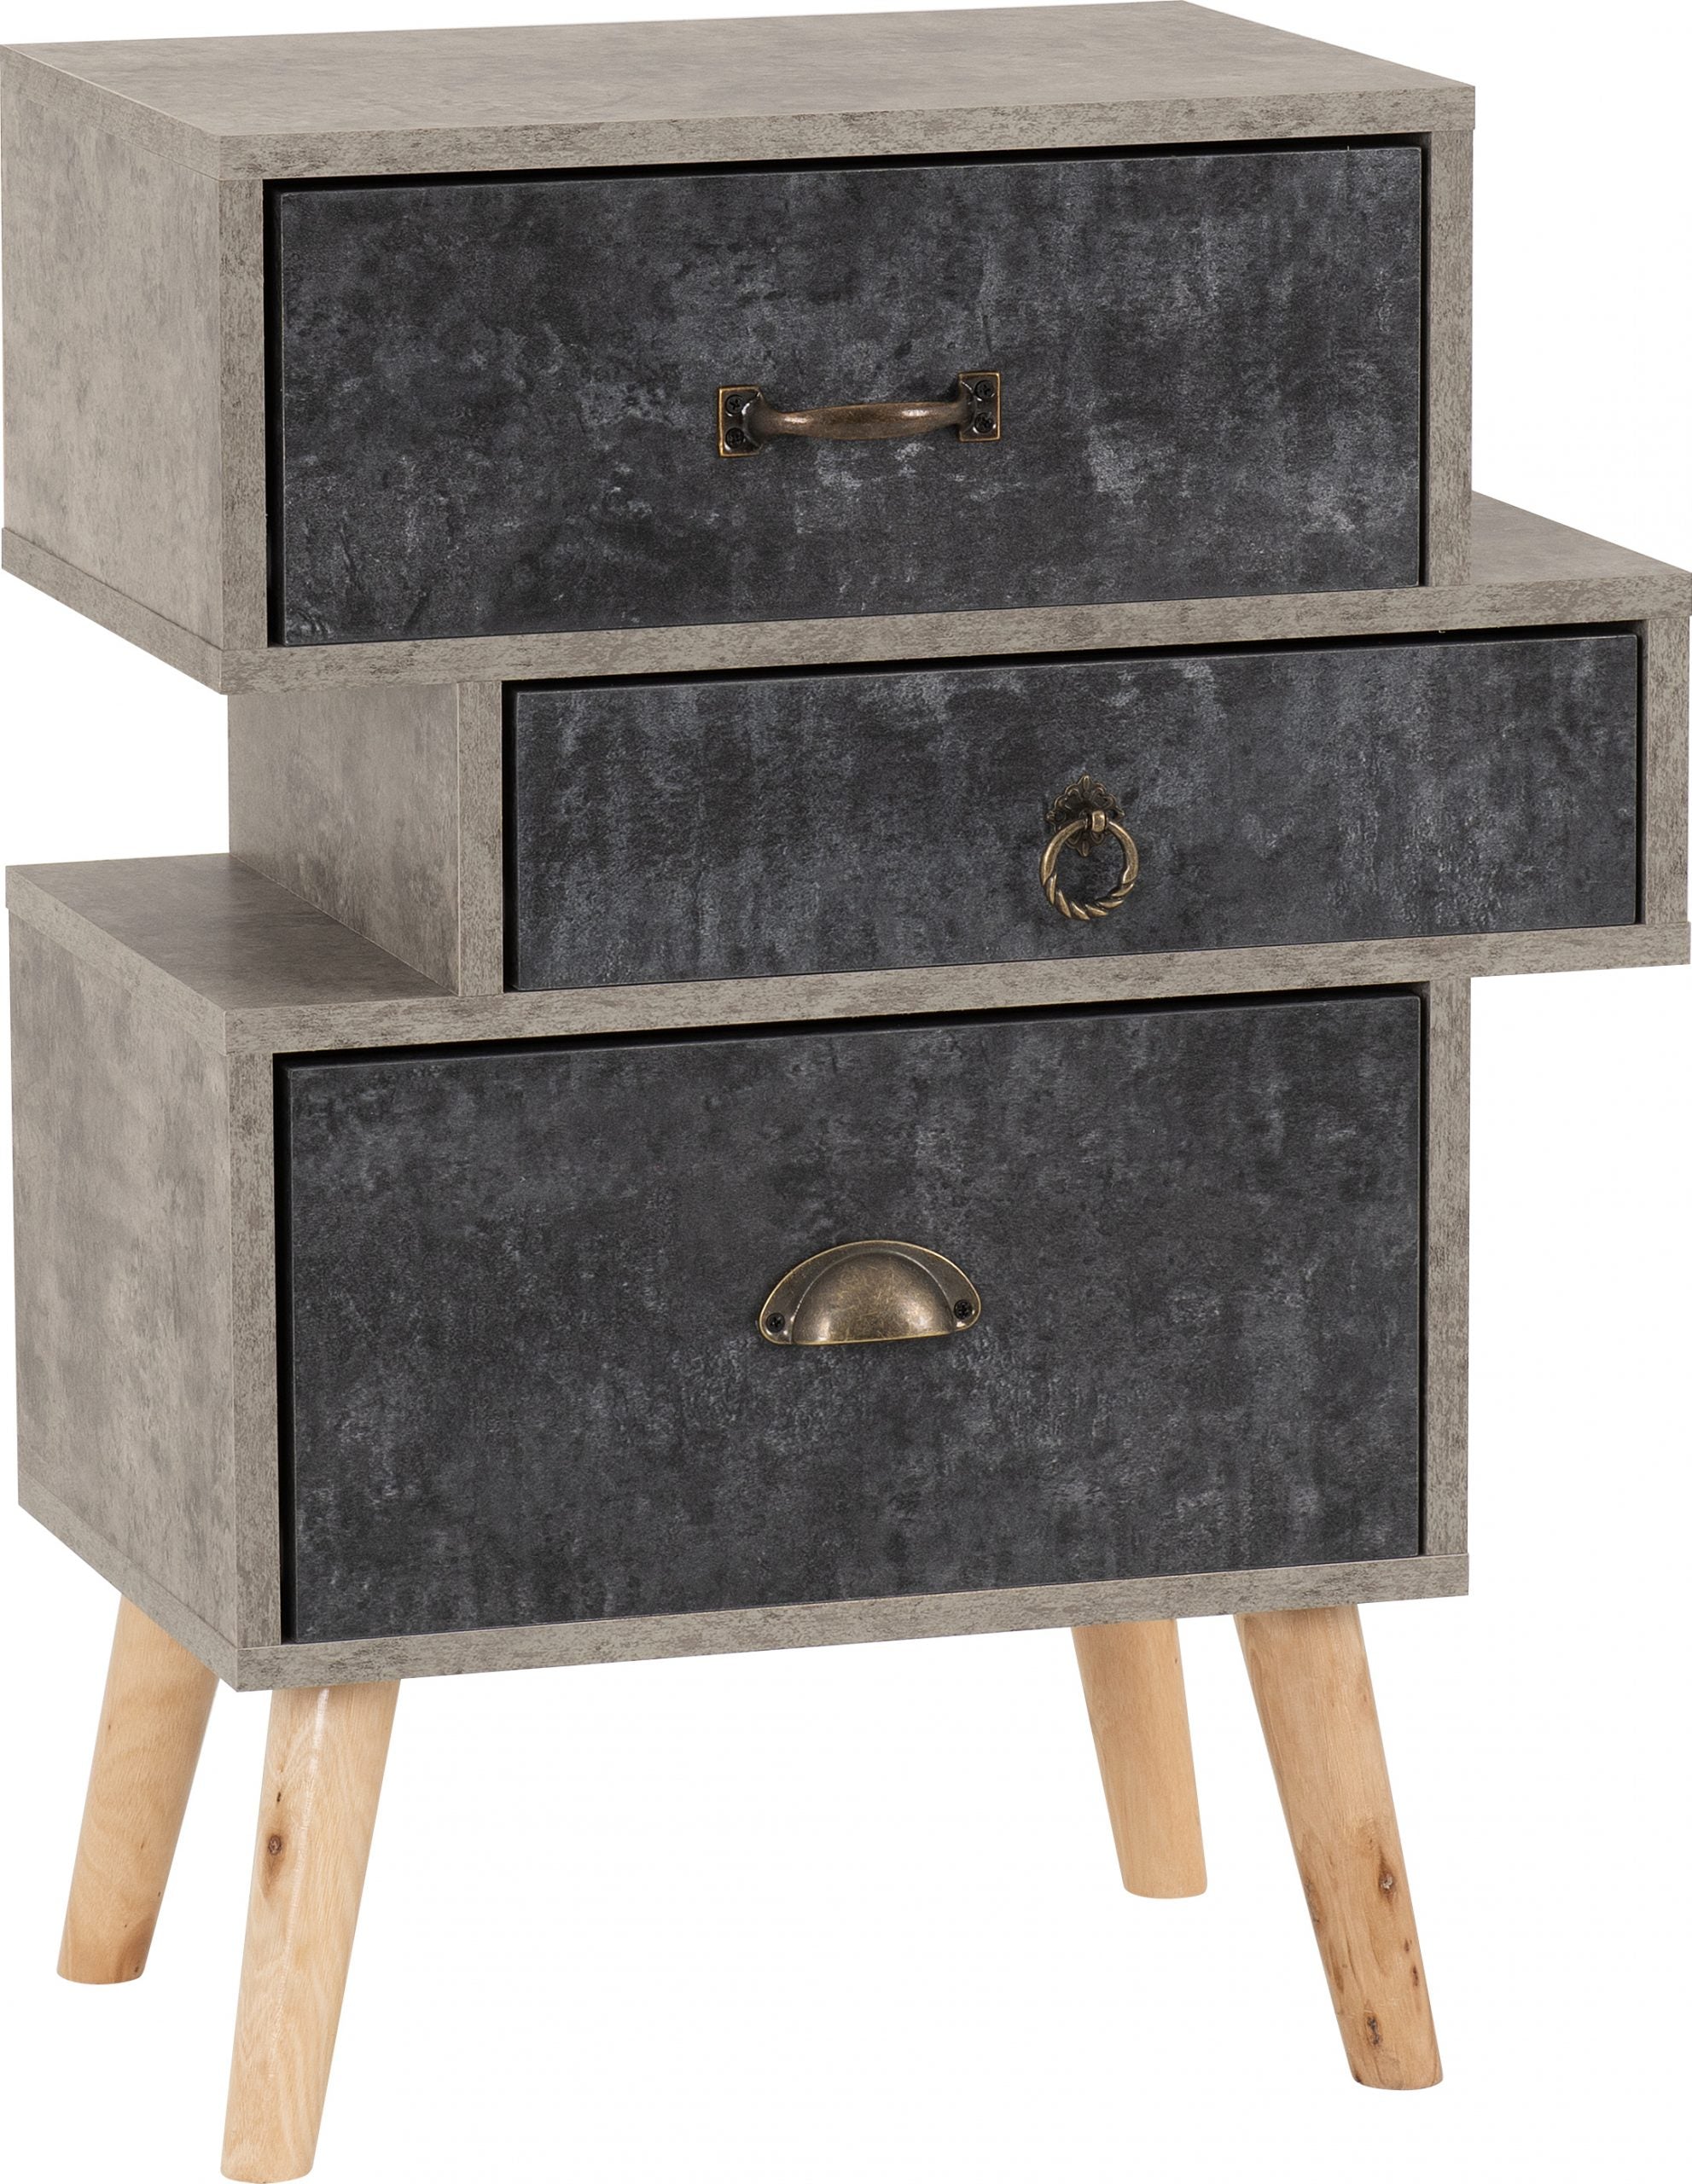 Nordic 3 Drawer Bedside Concrete Effect/Charcoal